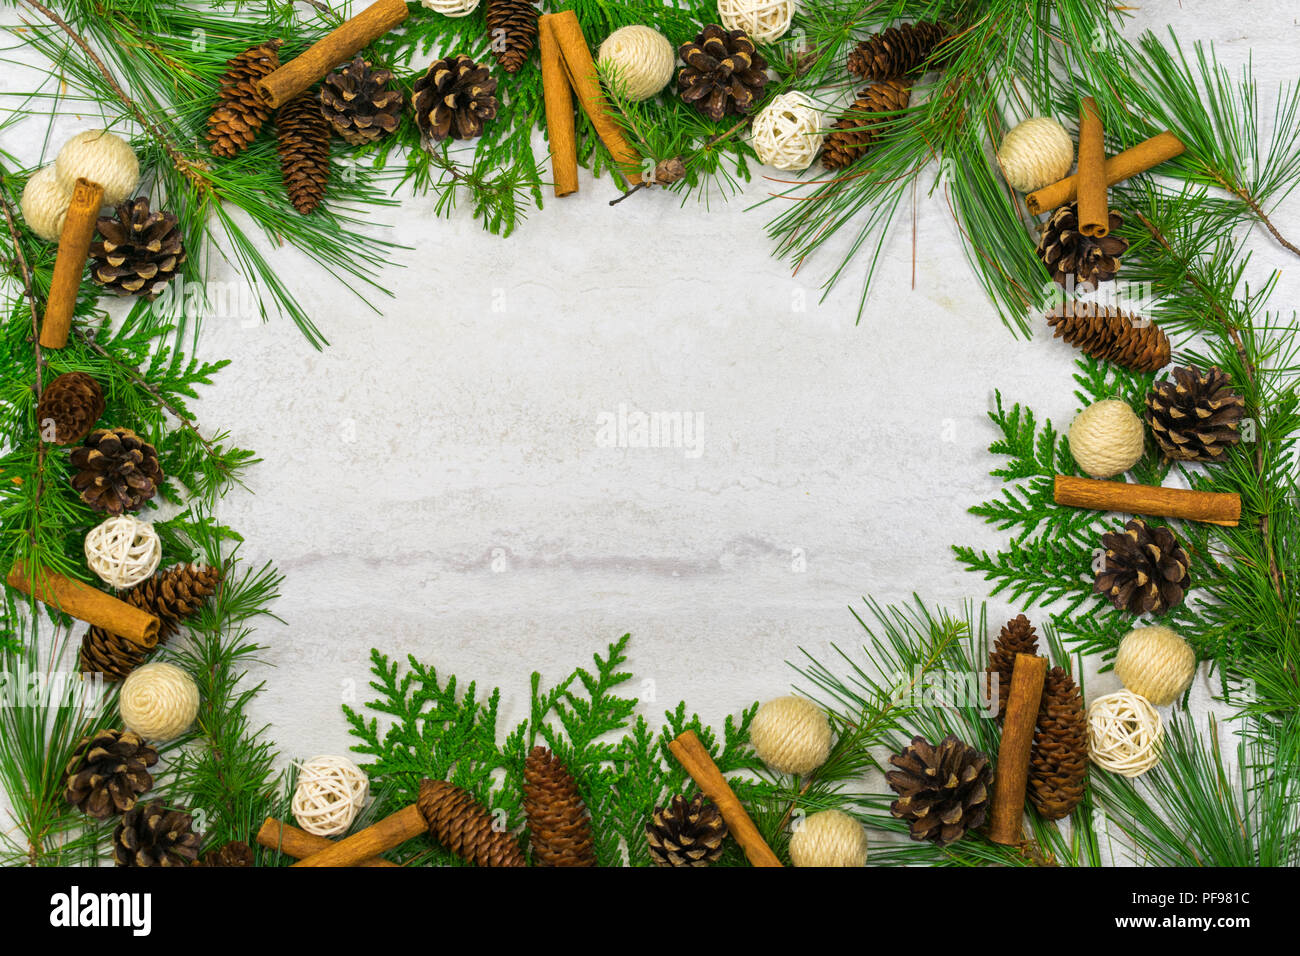 A beautiful border of white pine, larch,and cedar boughs with pine cones, cinnamon sticks, and balls of twigs and twine Stock Photo